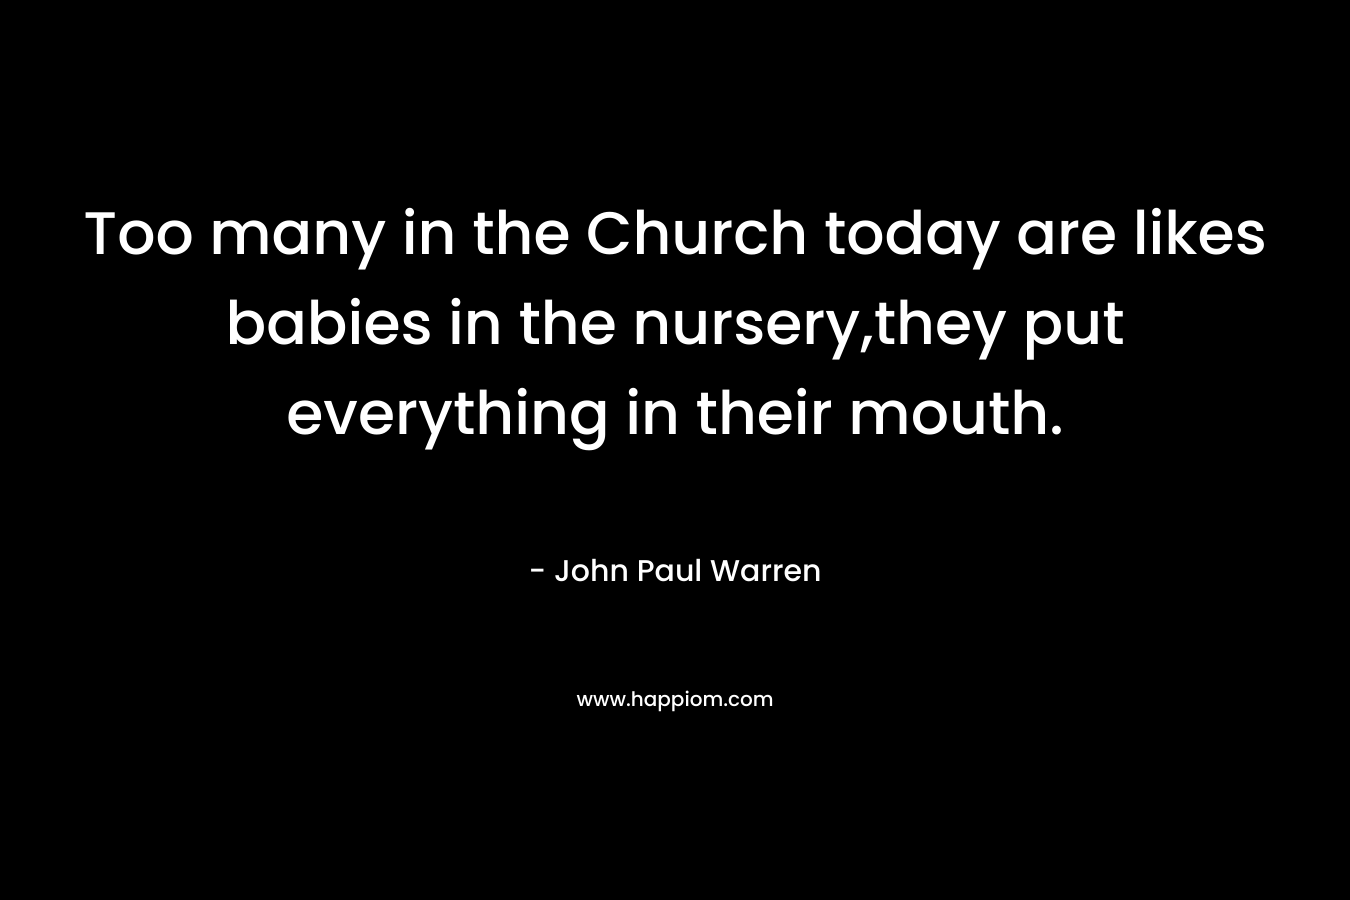 Too many in the Church today are likes babies in the nursery,they put everything in their mouth.